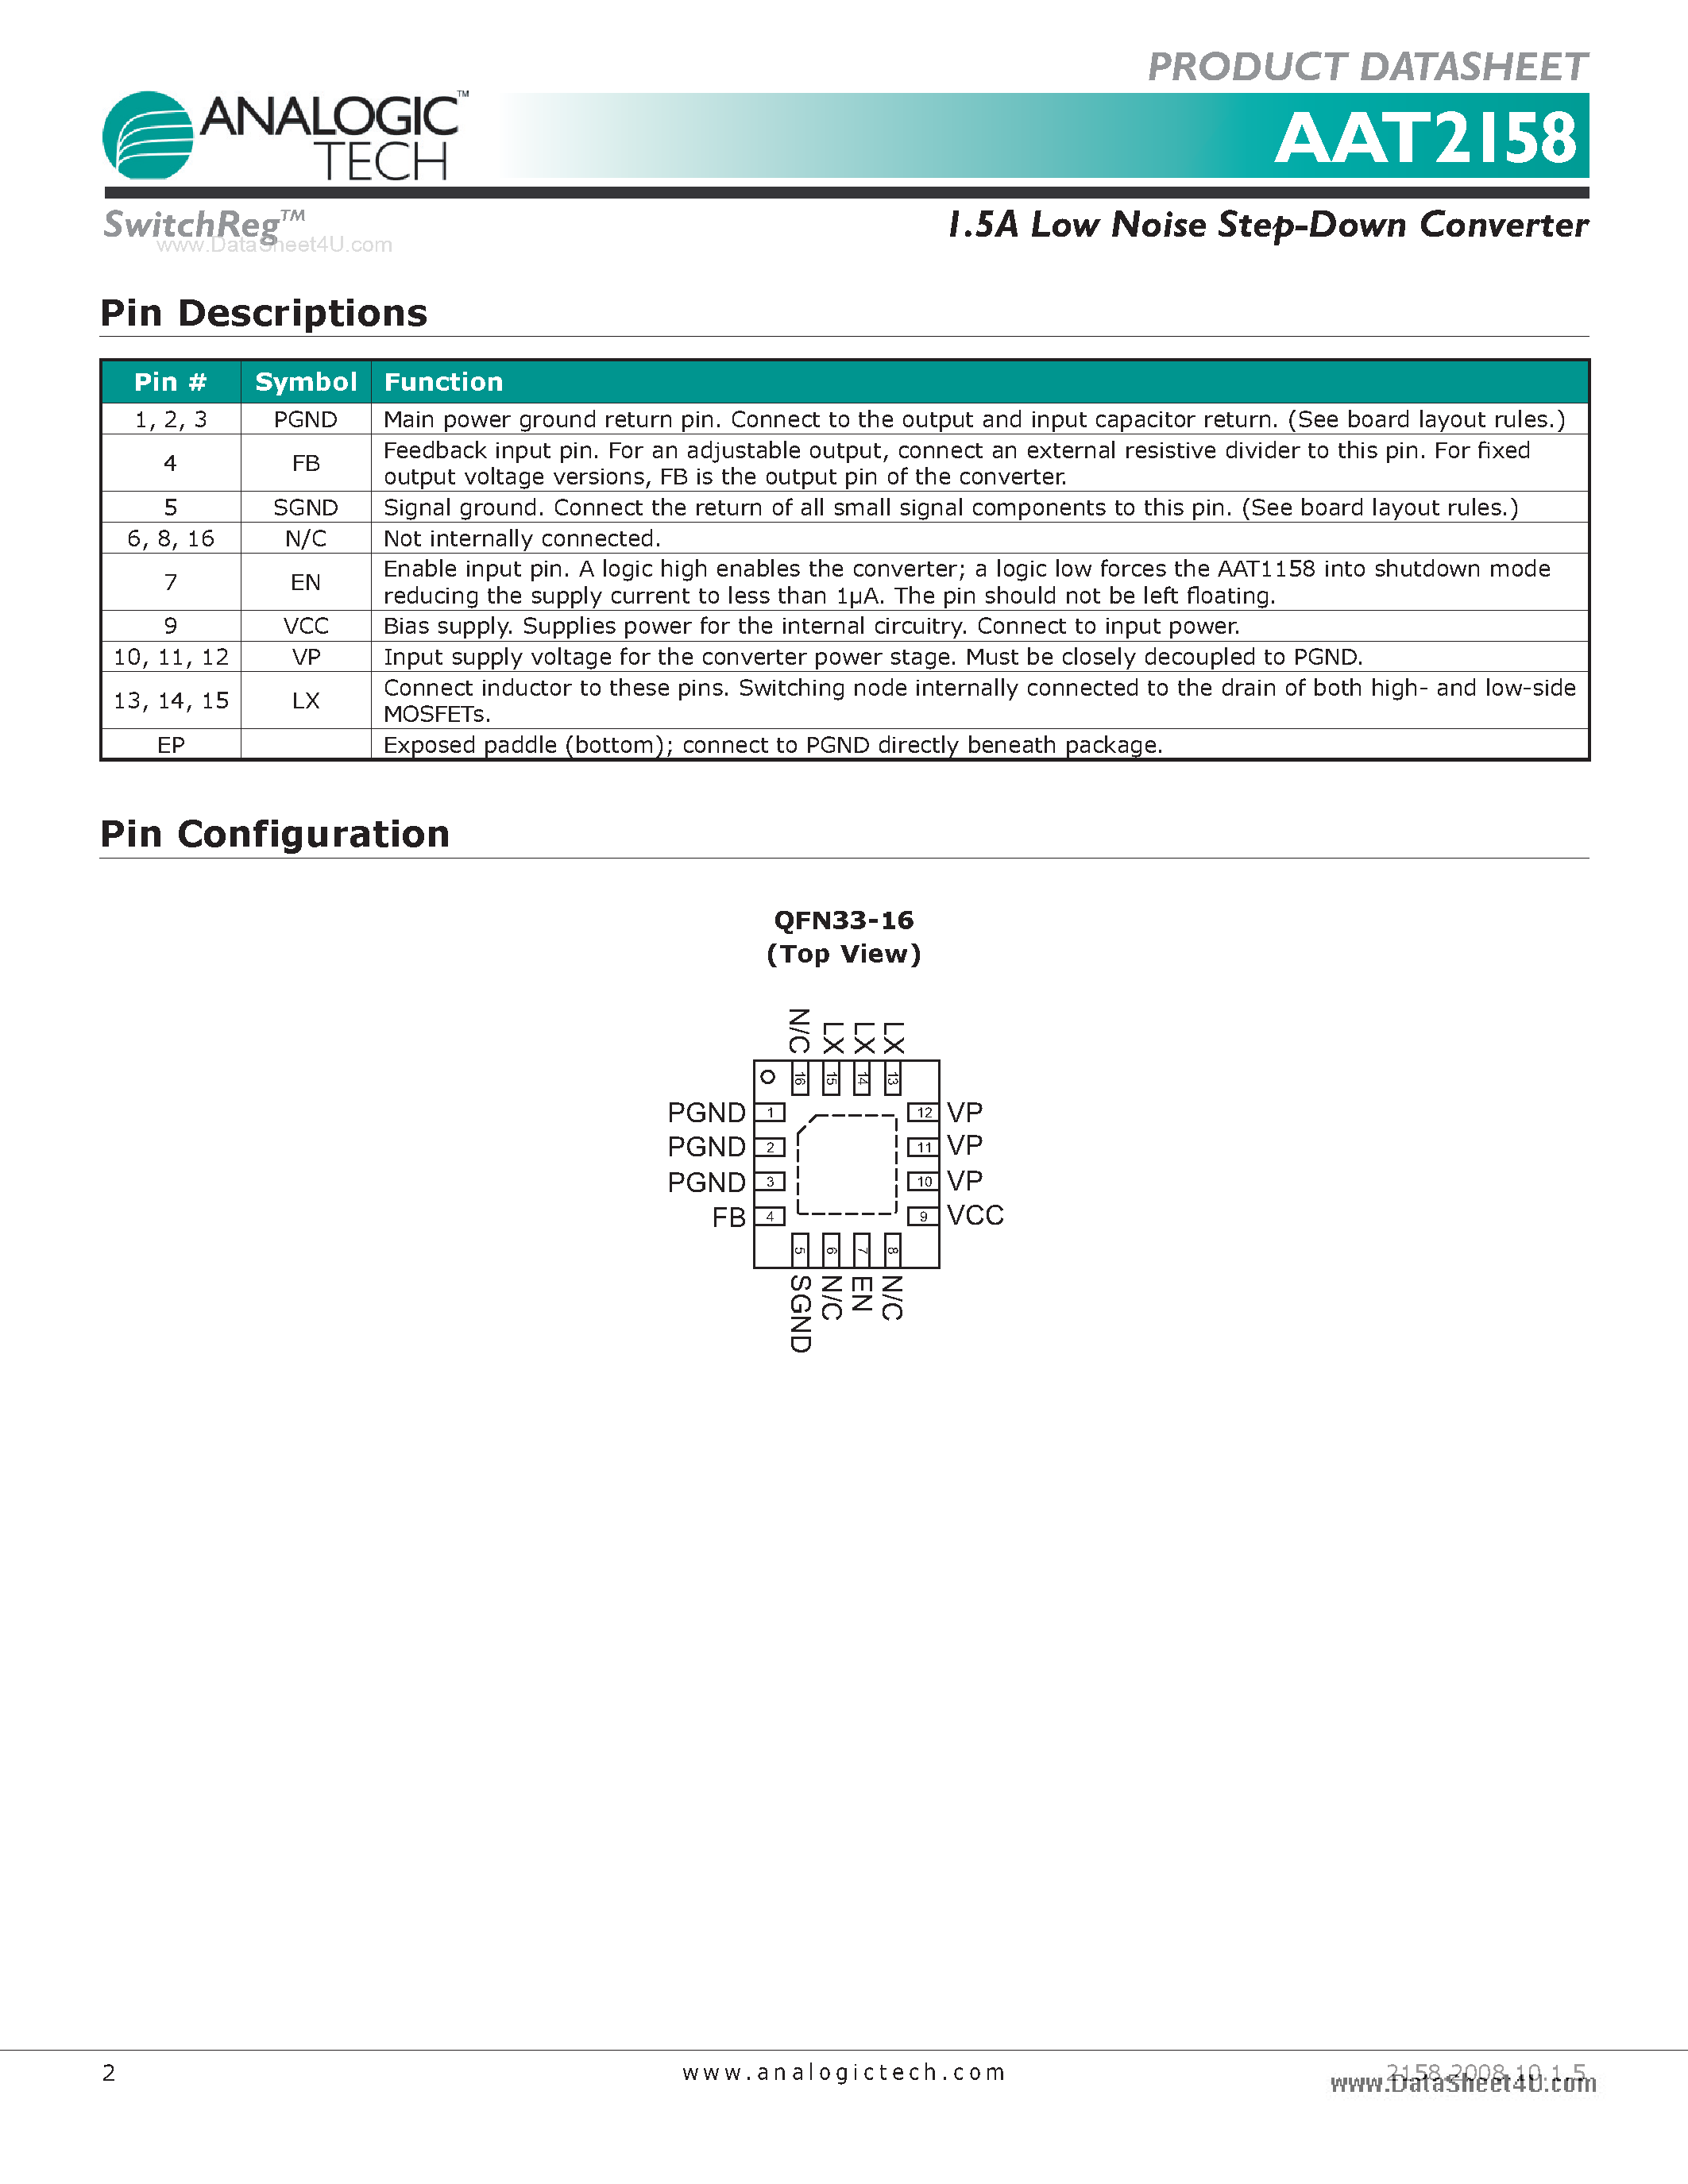 Datasheet AAT2158 - 1.5A Low Noise Step-Down Converter page 2